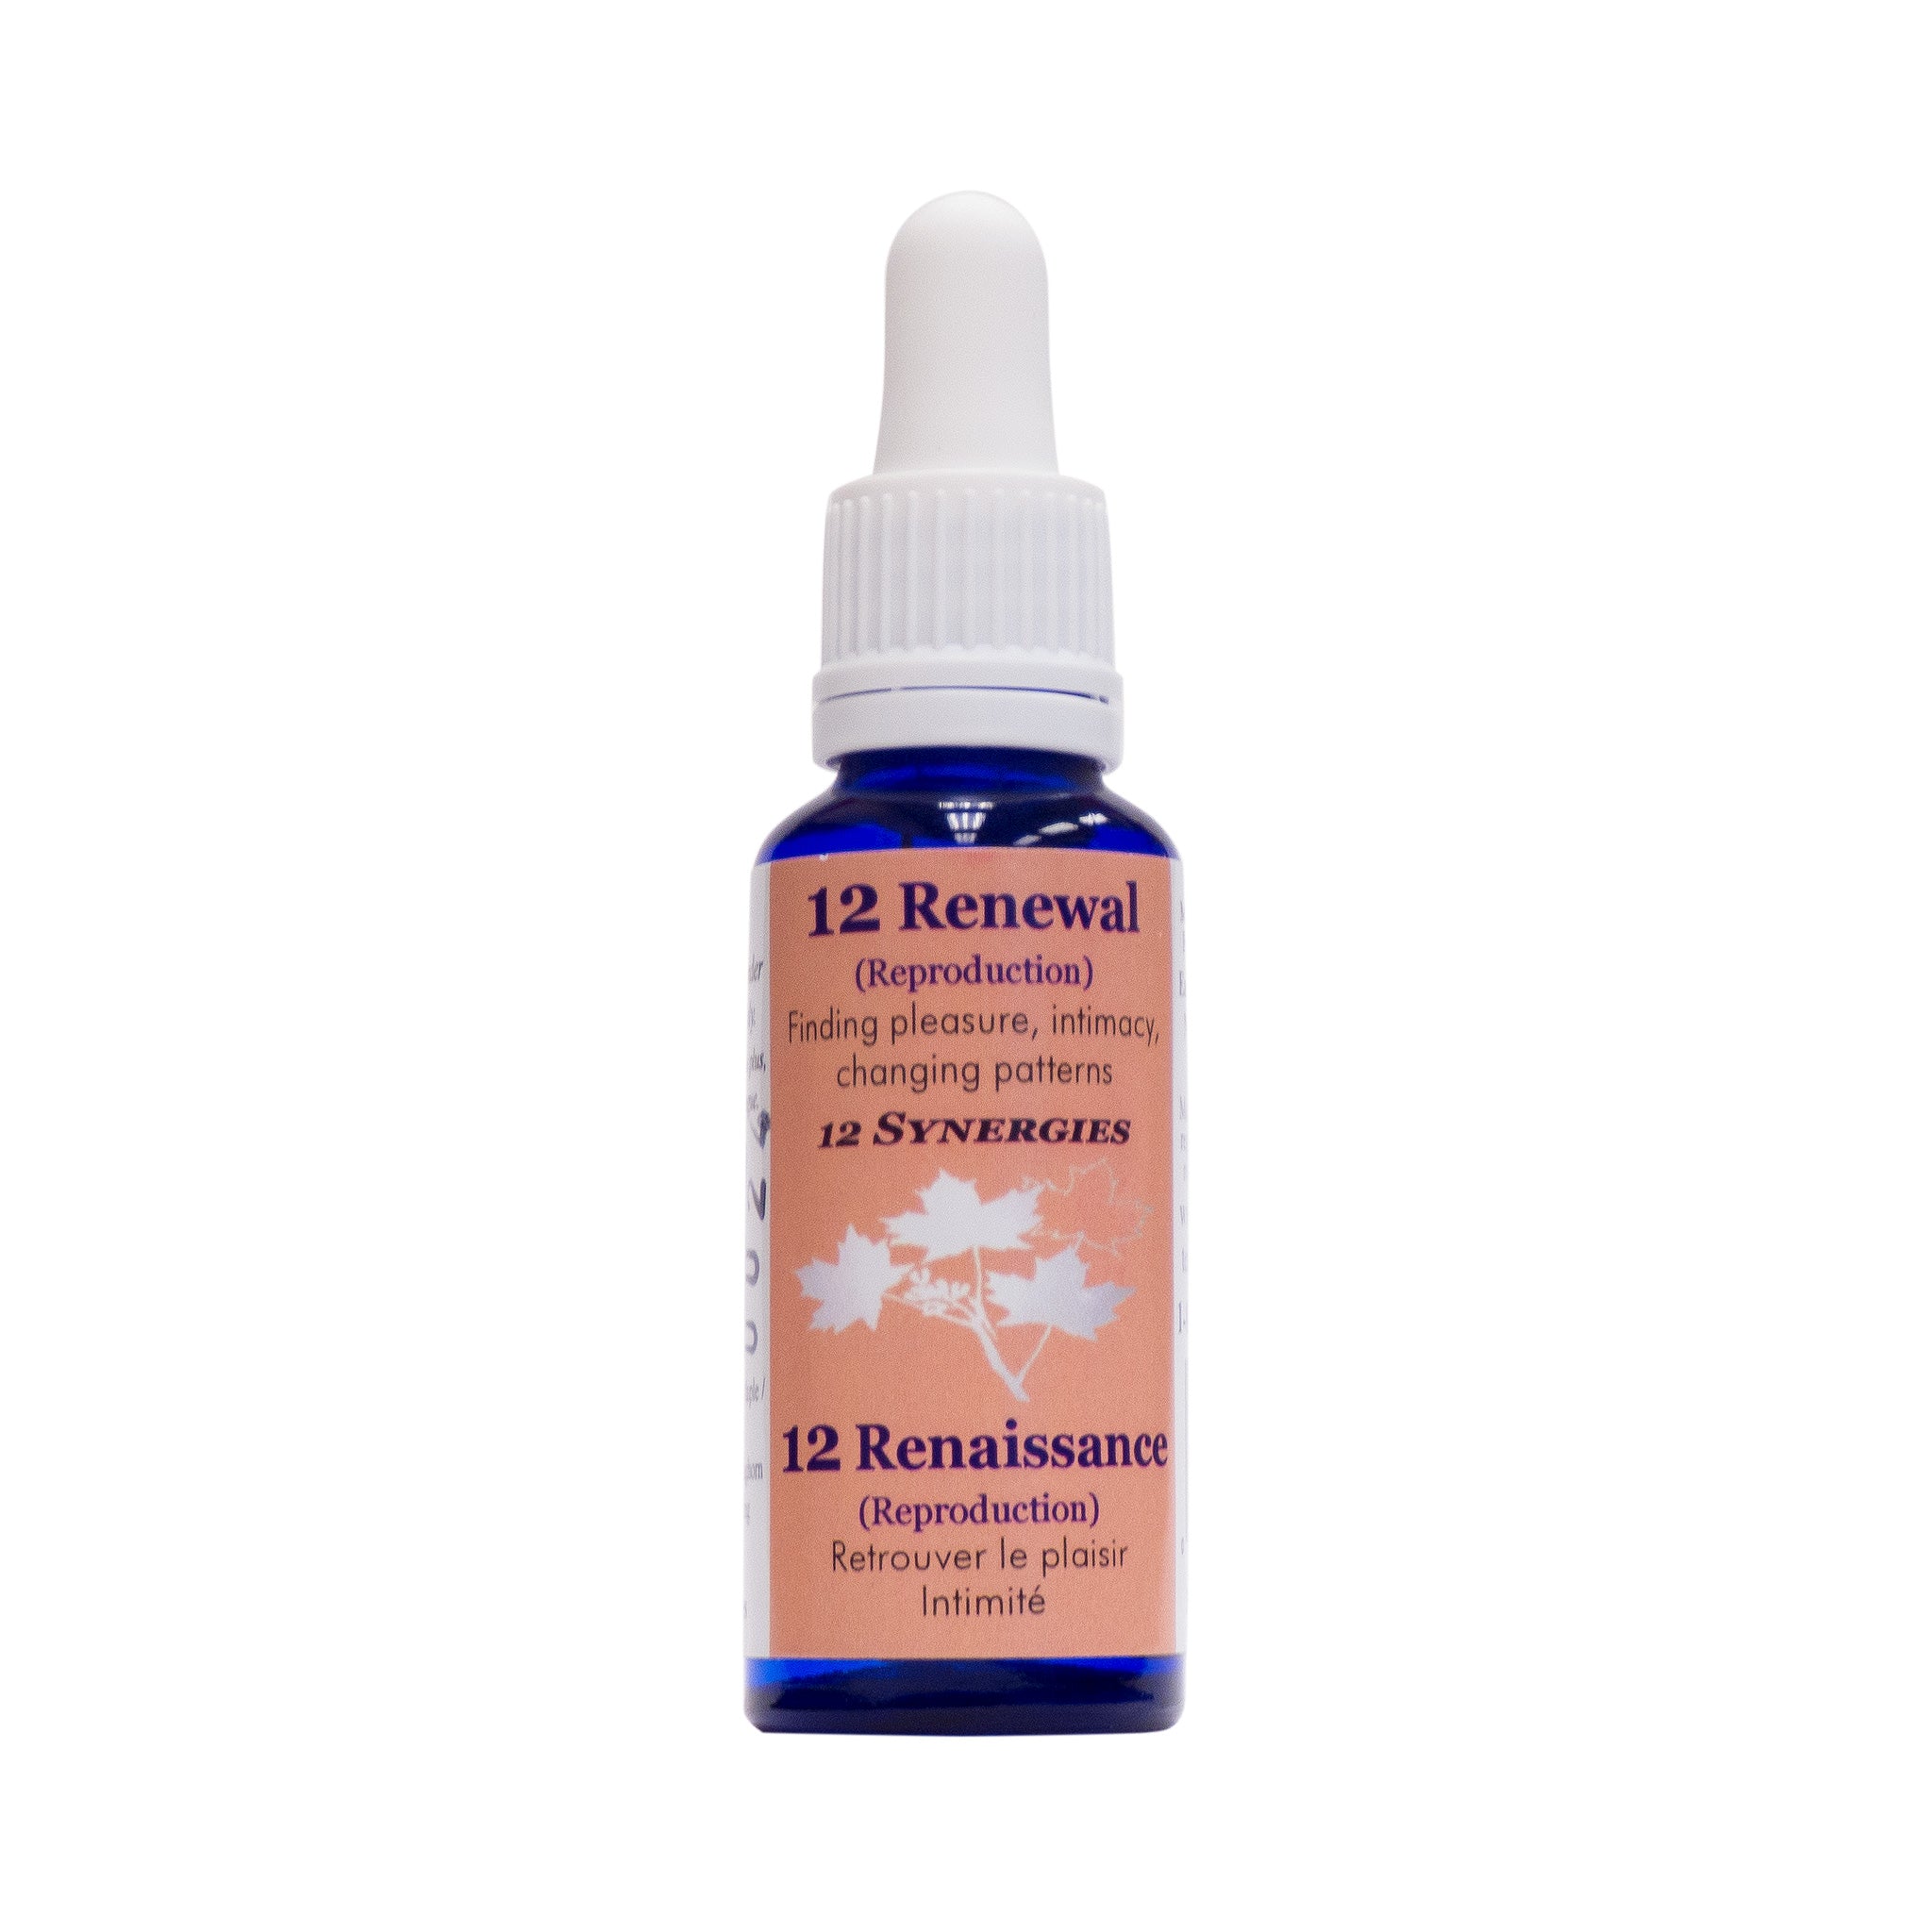 12. Renewal Essence for Reproductive System Wellness